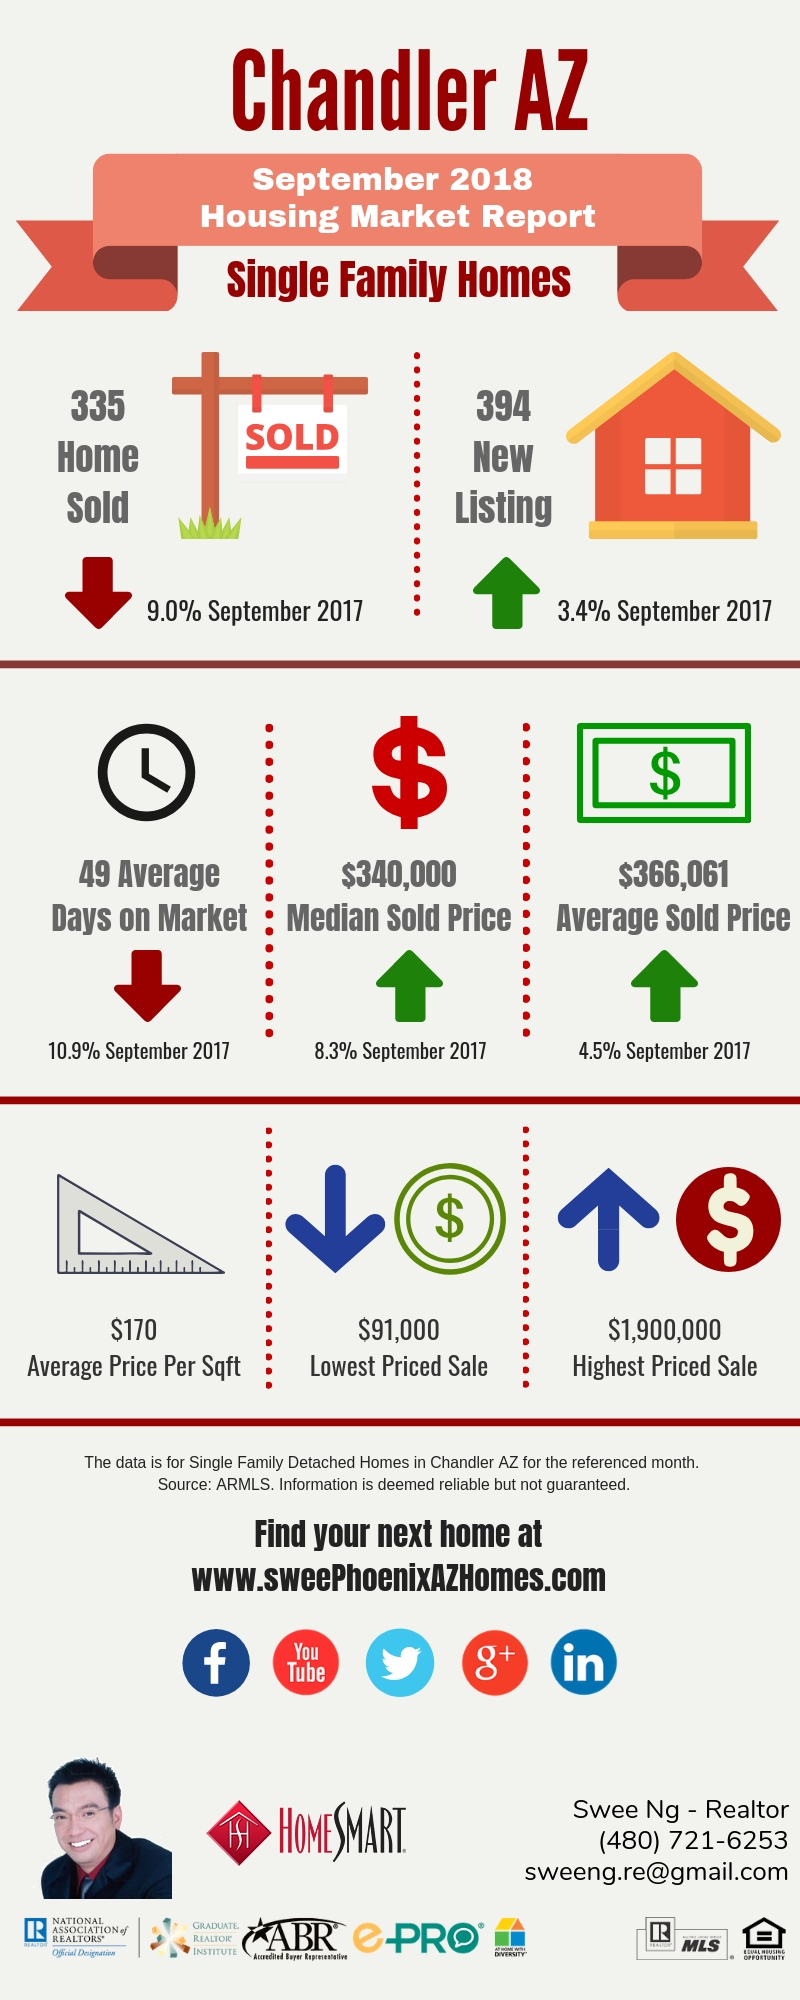 Chandler AZ Housing Market Update September 2018 by Swee Ng, House Value and Real Estate Listings